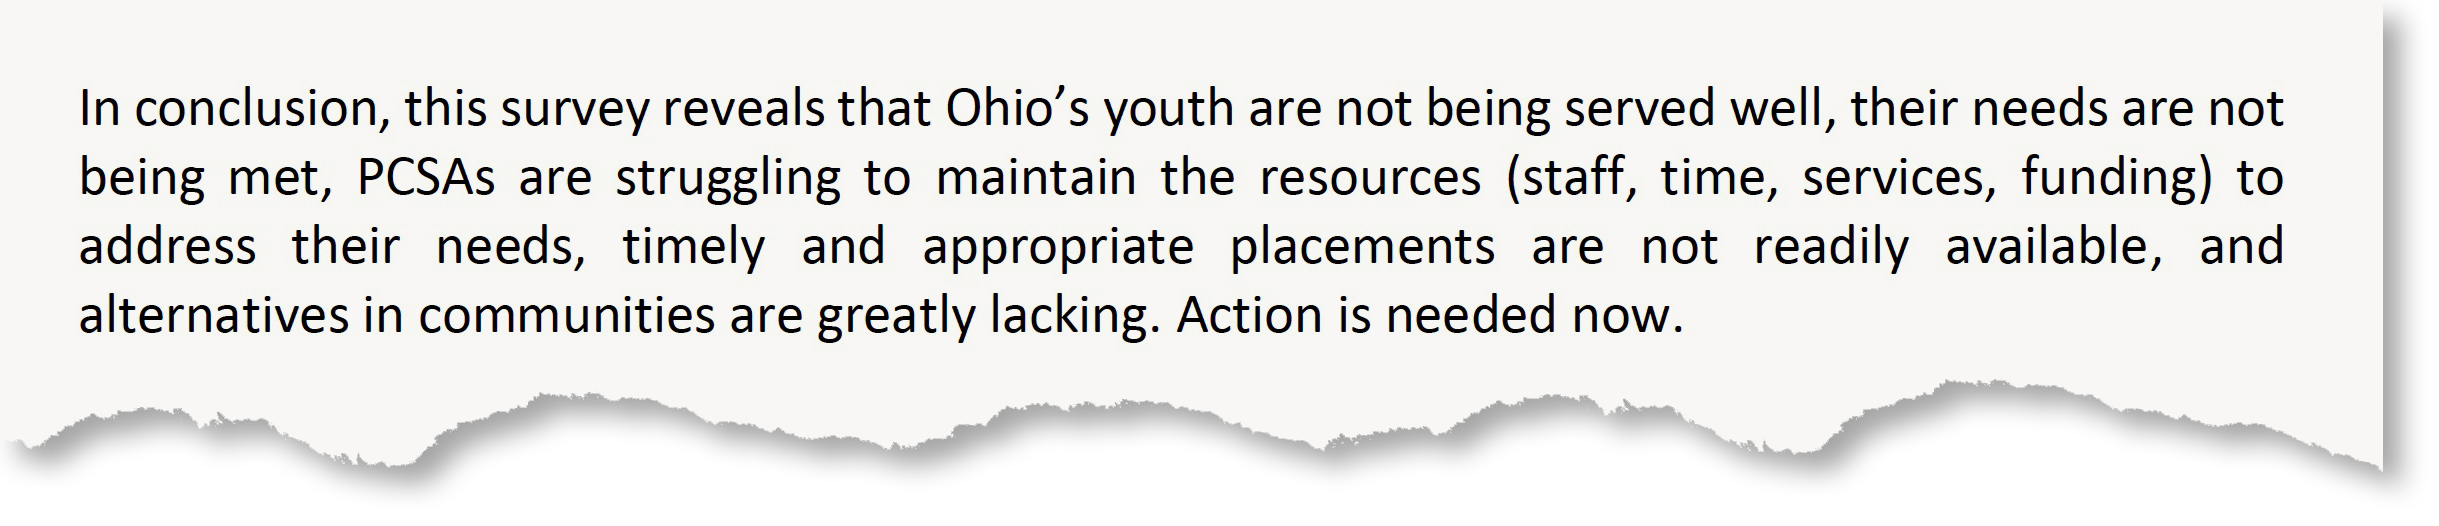 A section from a report on the placement crisis in the child welfare system